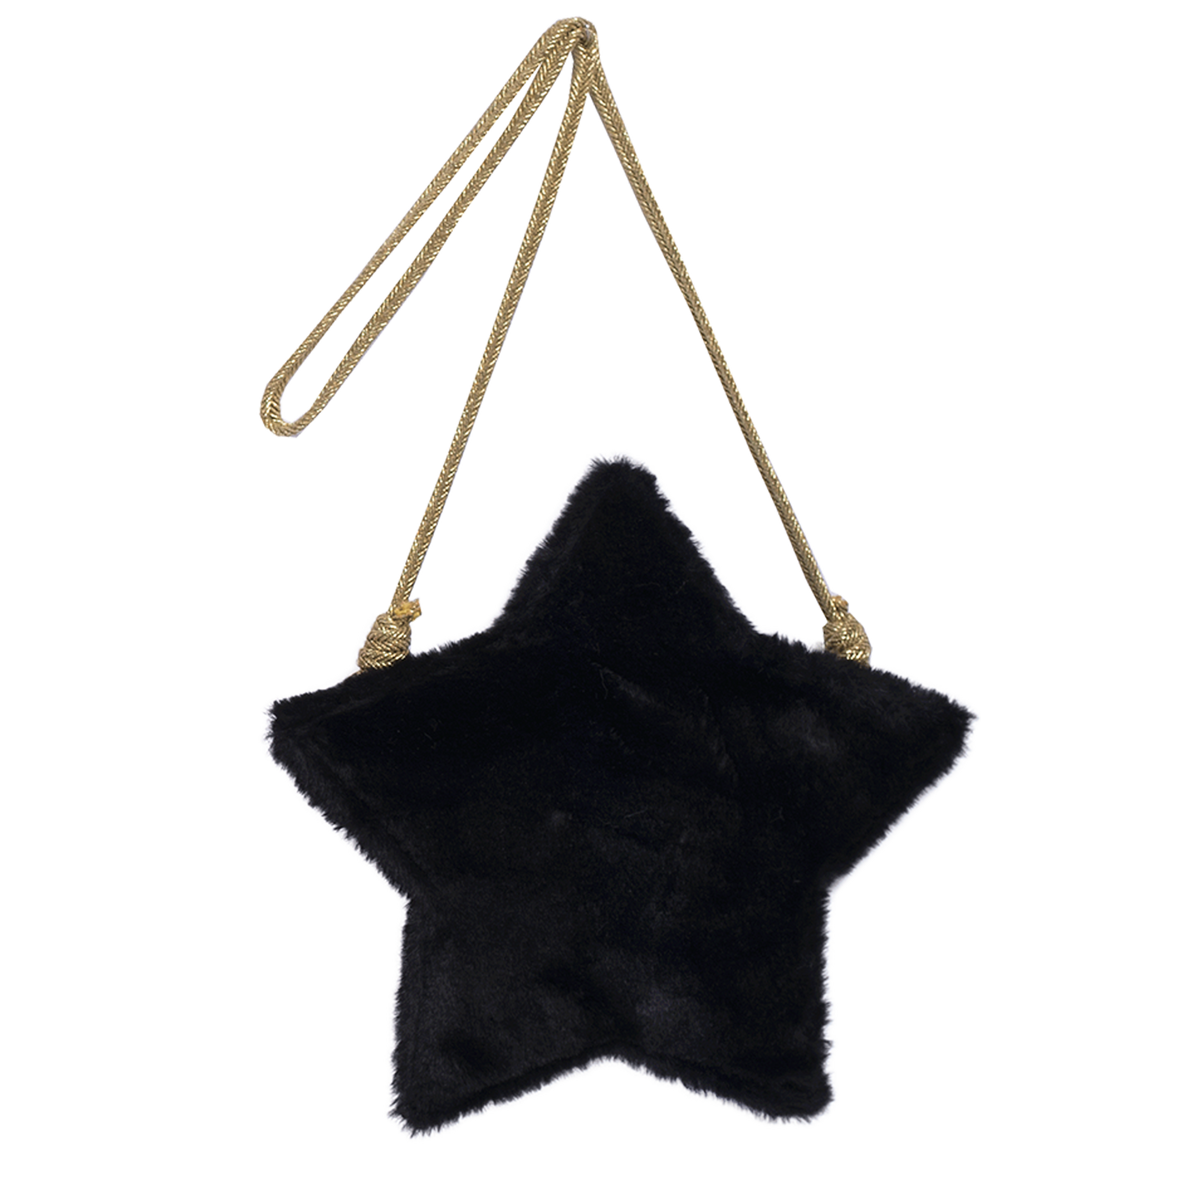 Black faux fur girls purse in the shape of a star with zipper in the back. Strap is made of gold fabric and designed by Imoga.